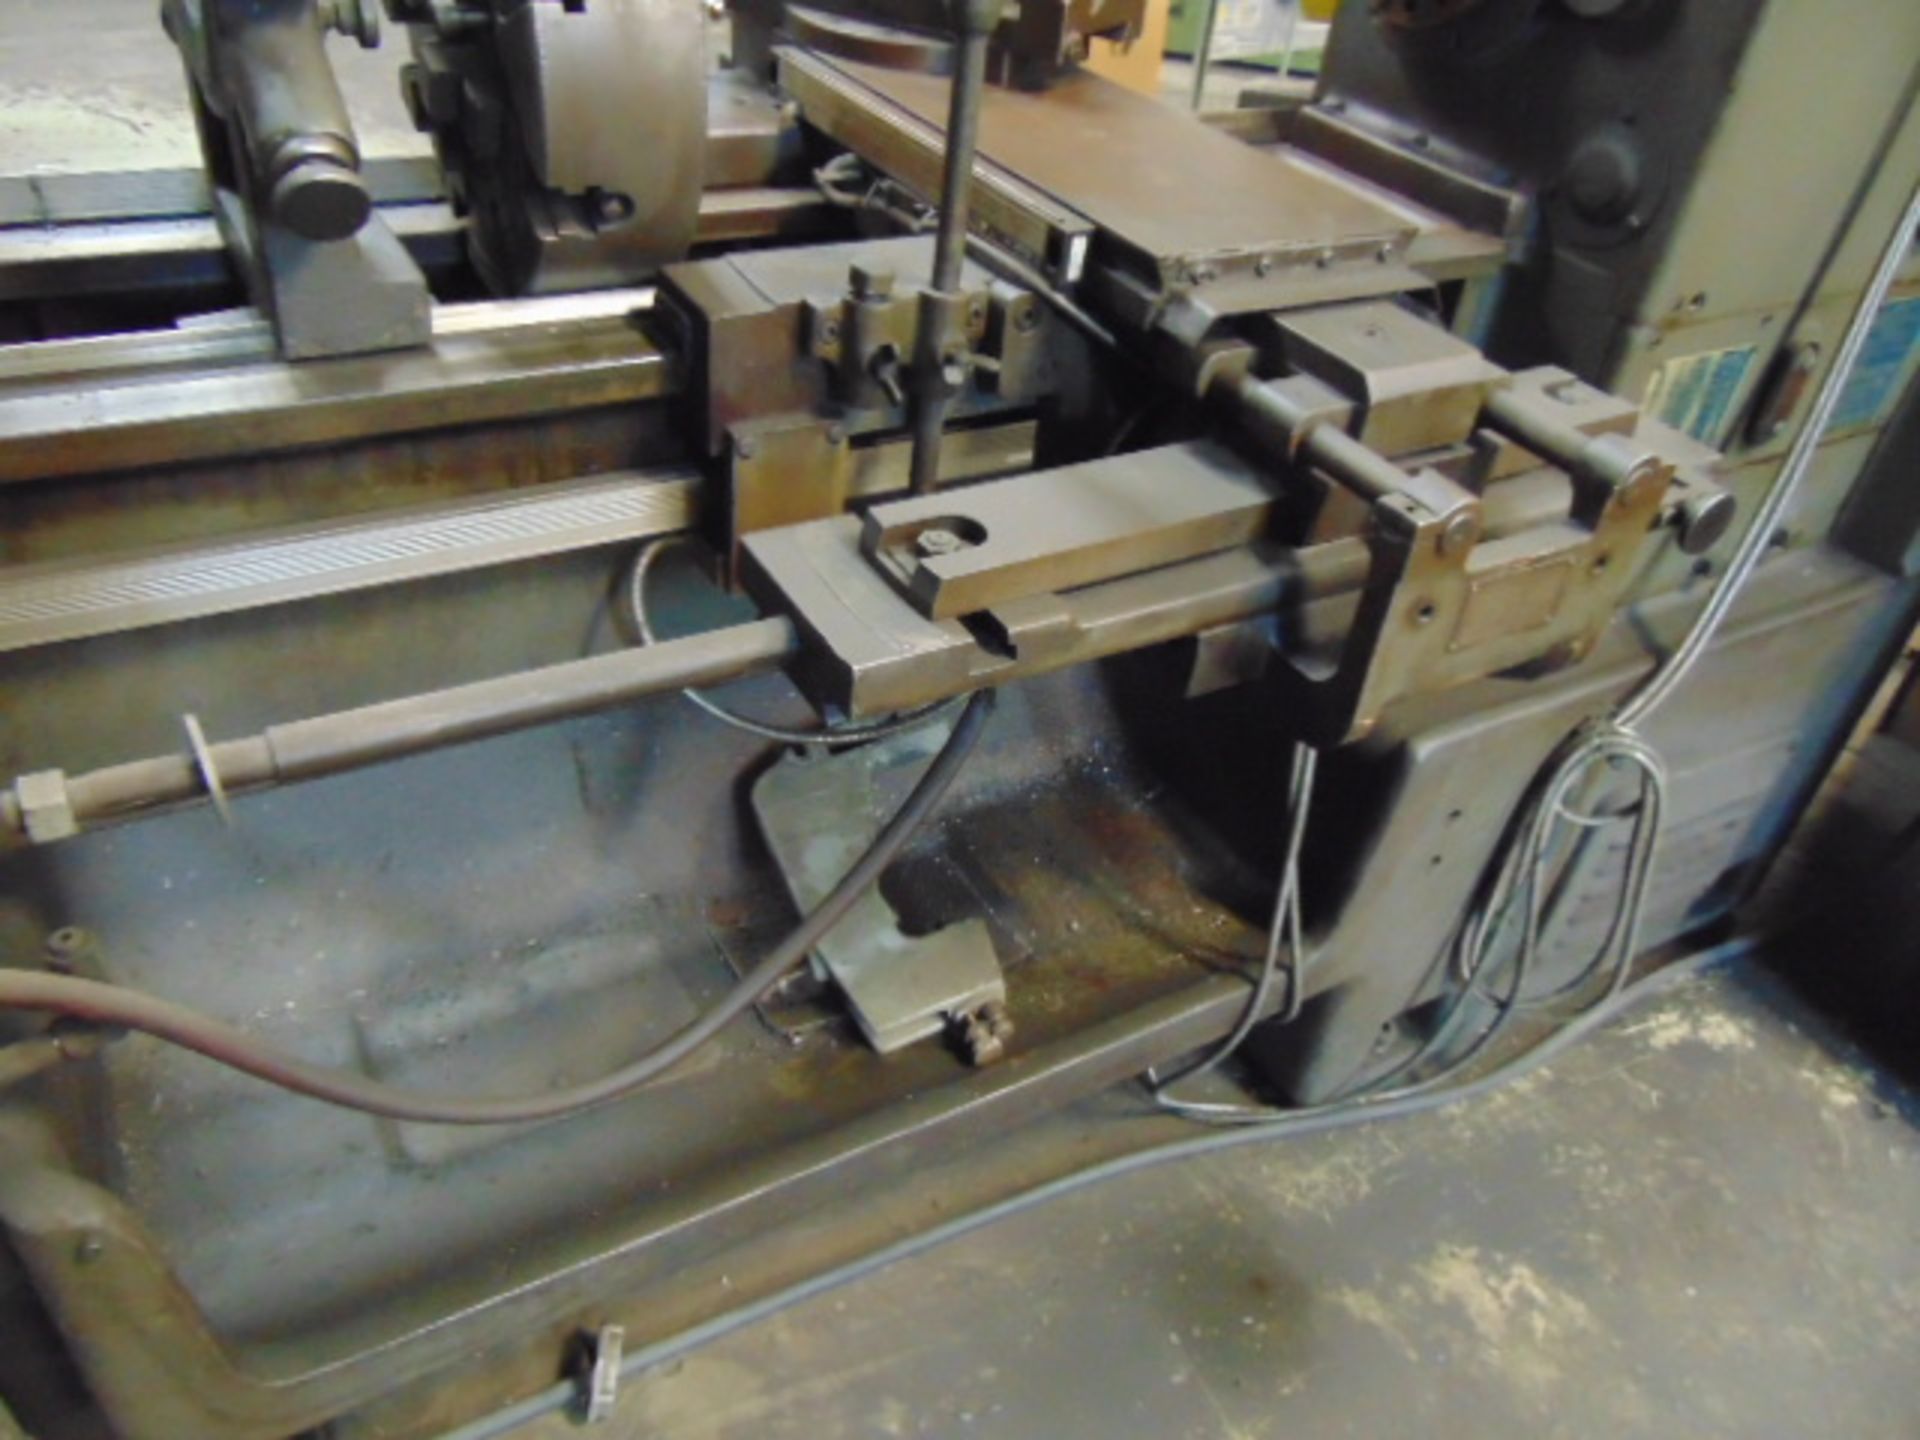 GAP BED ENGINE LATHE, WEBB 17” X 40” MDL. 17GX40, 5 HP motor, taper attach., 5 C lever activated - Image 13 of 15